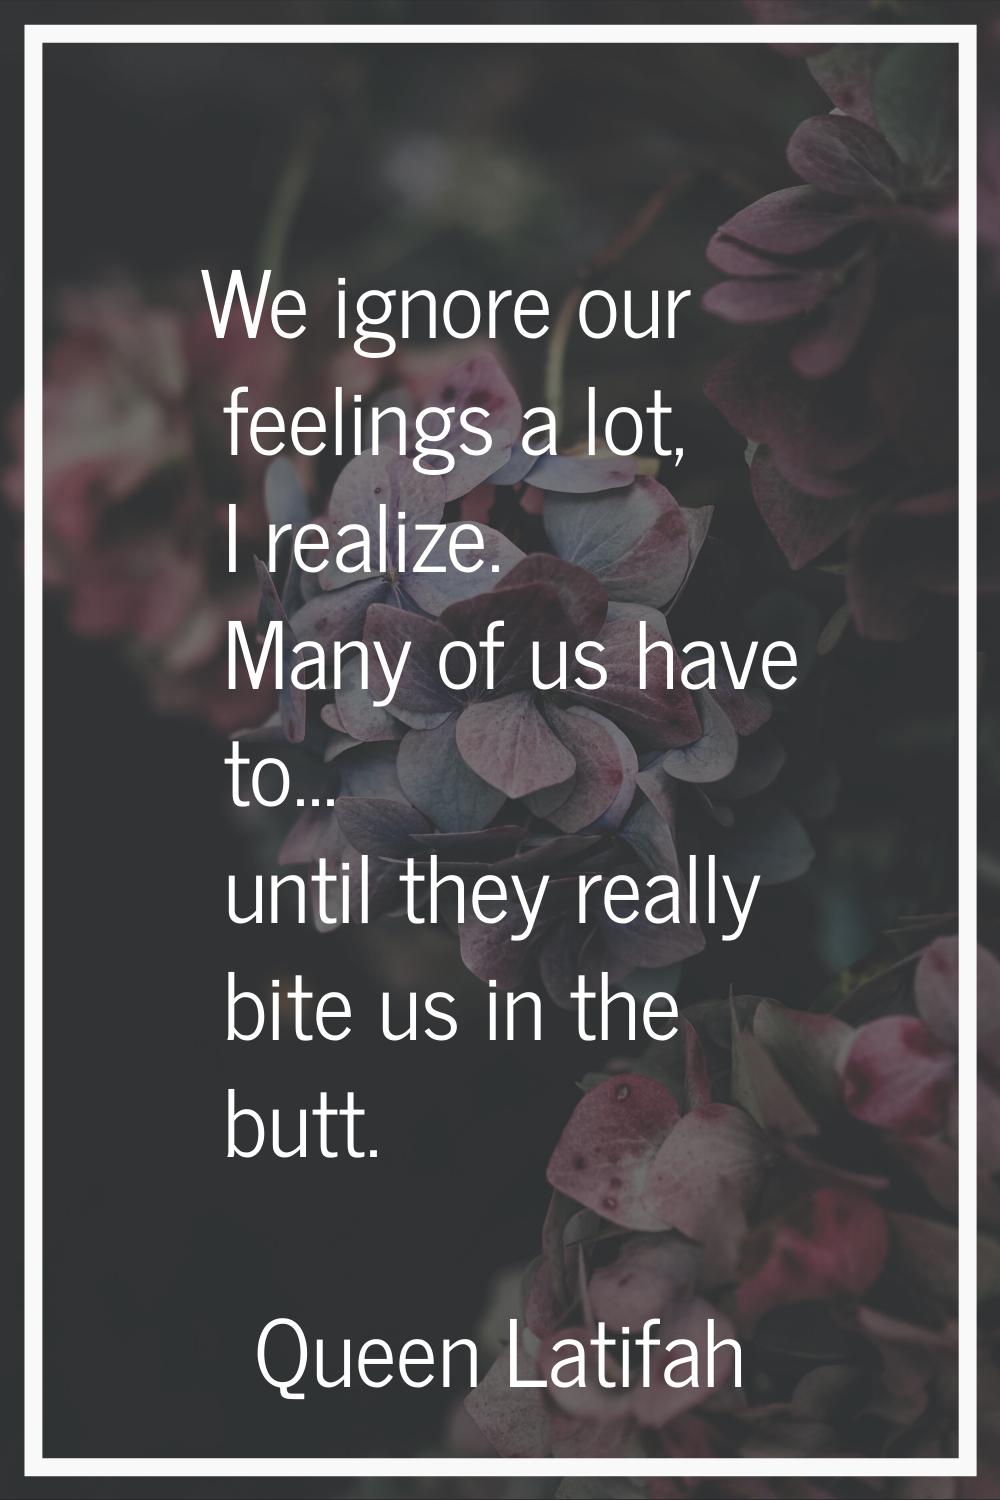 We ignore our feelings a lot, I realize. Many of us have to... until they really bite us in the but